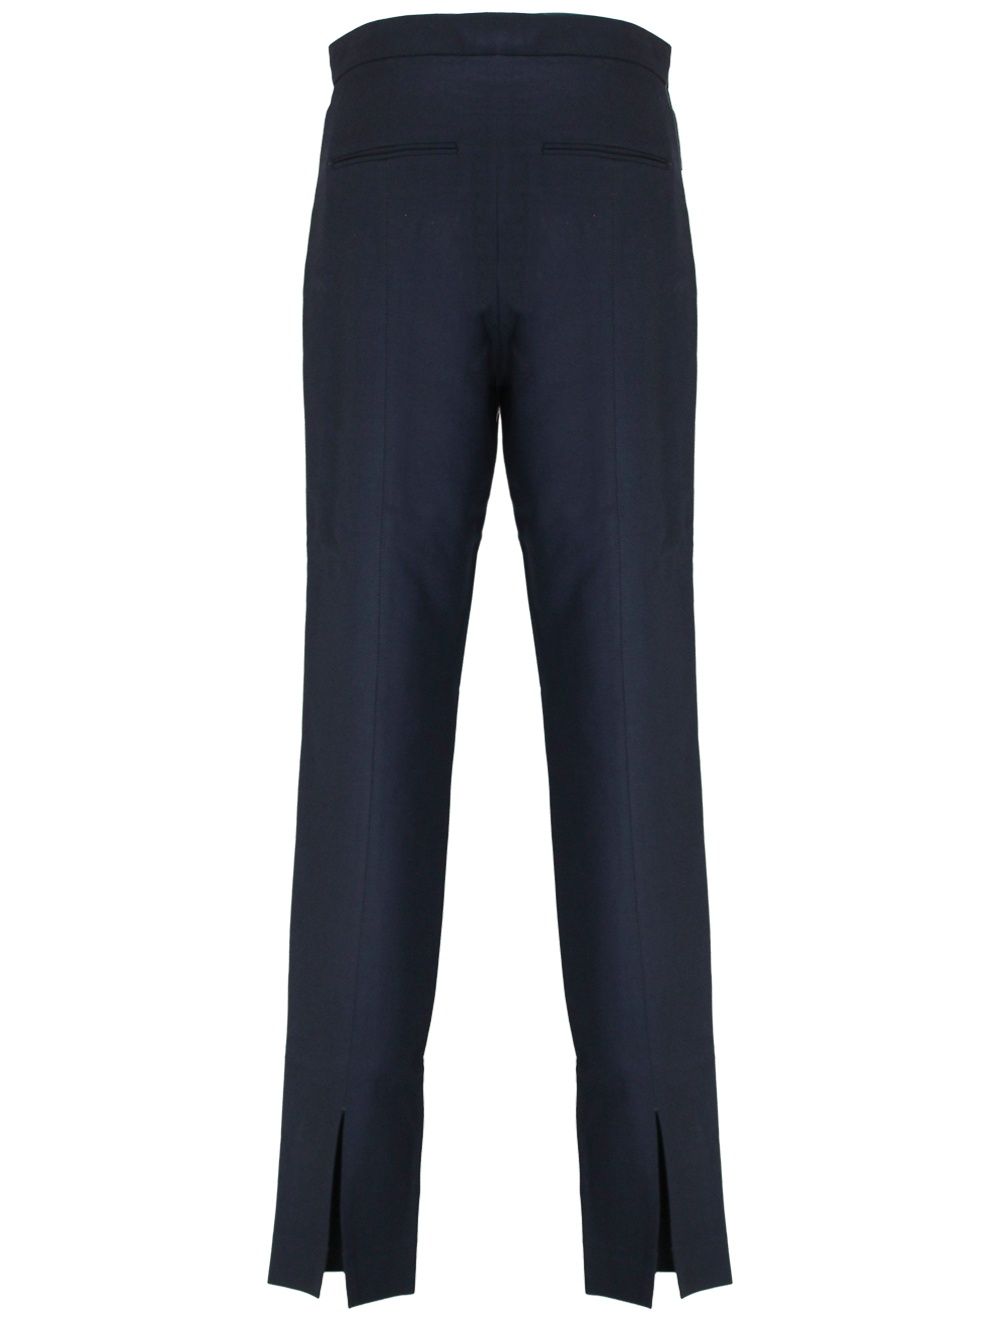 Slim fit tailored trousers